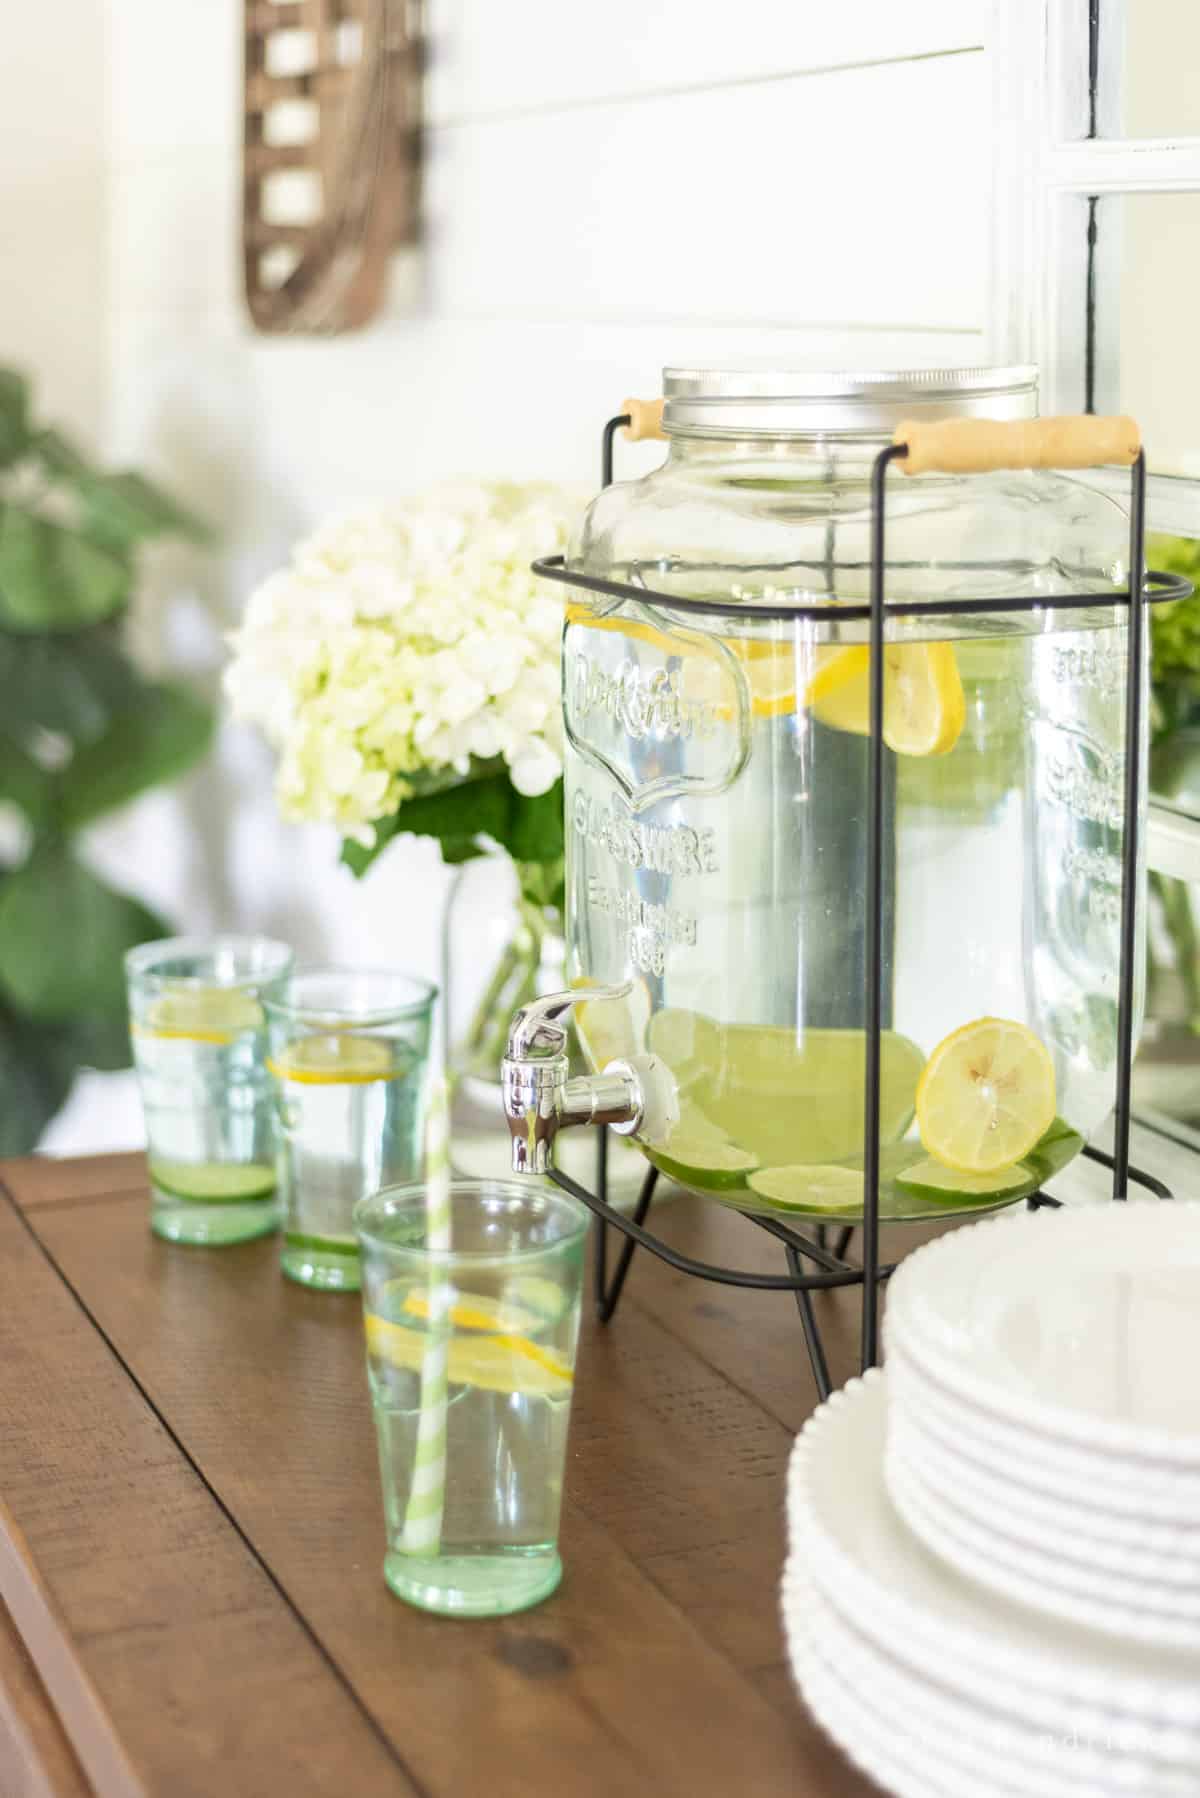 Mason jar drink dispenser with lemons and limes in the water